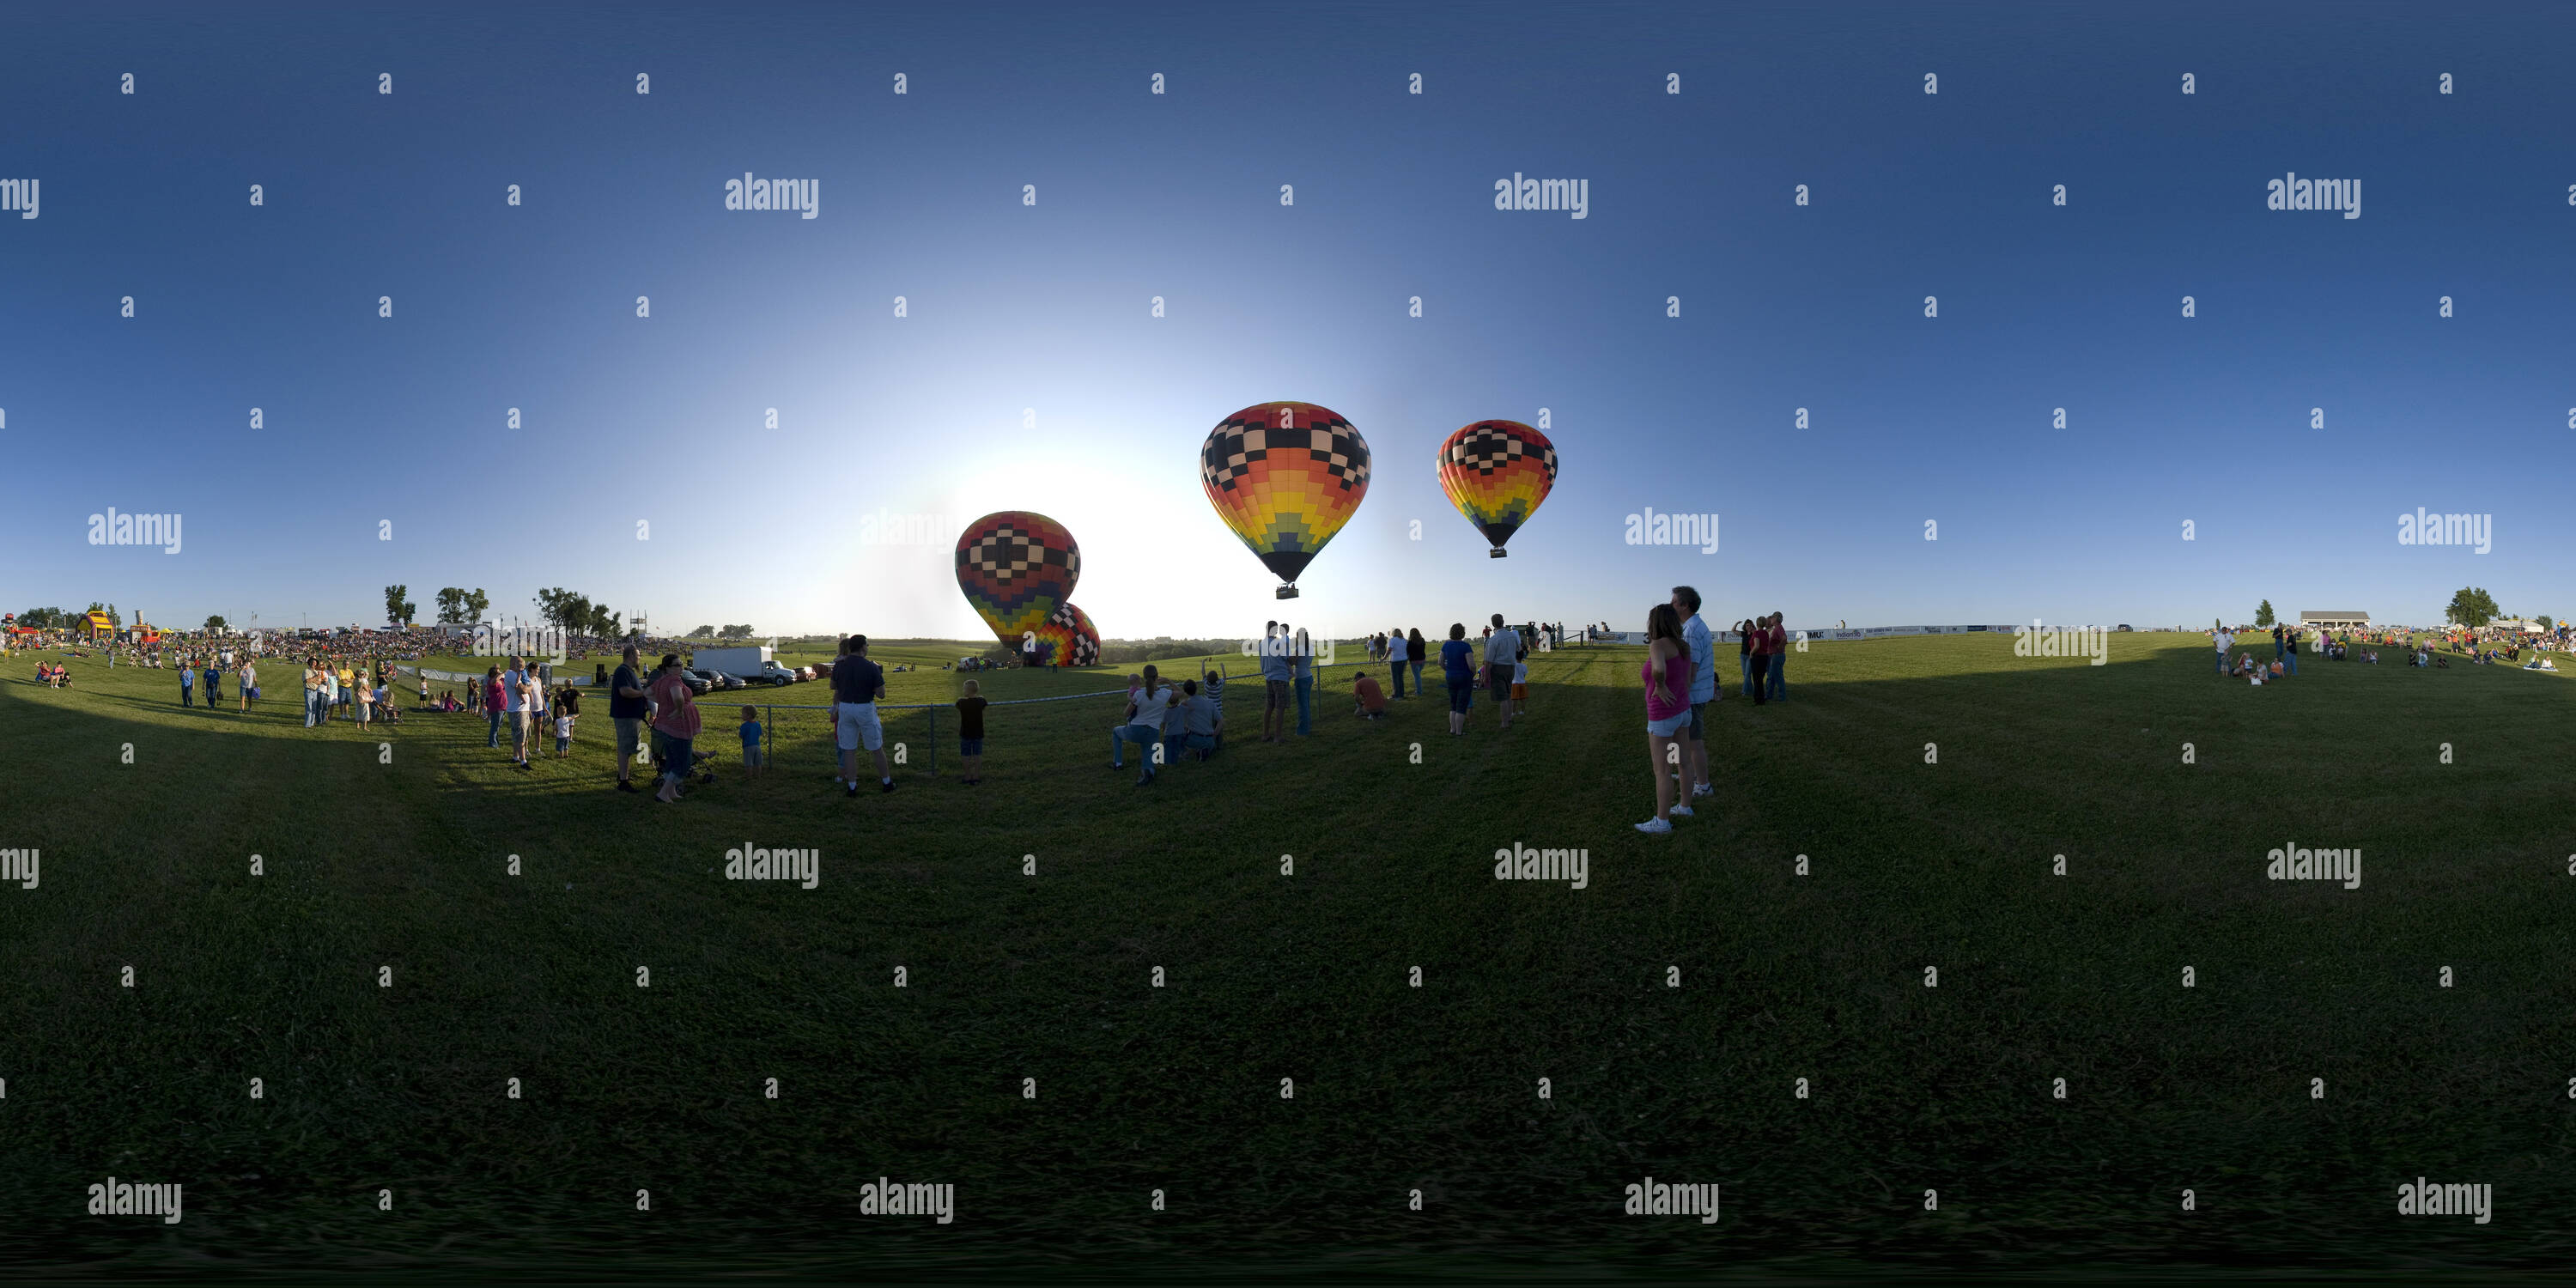 360° view of indianola balloon classic Alamy